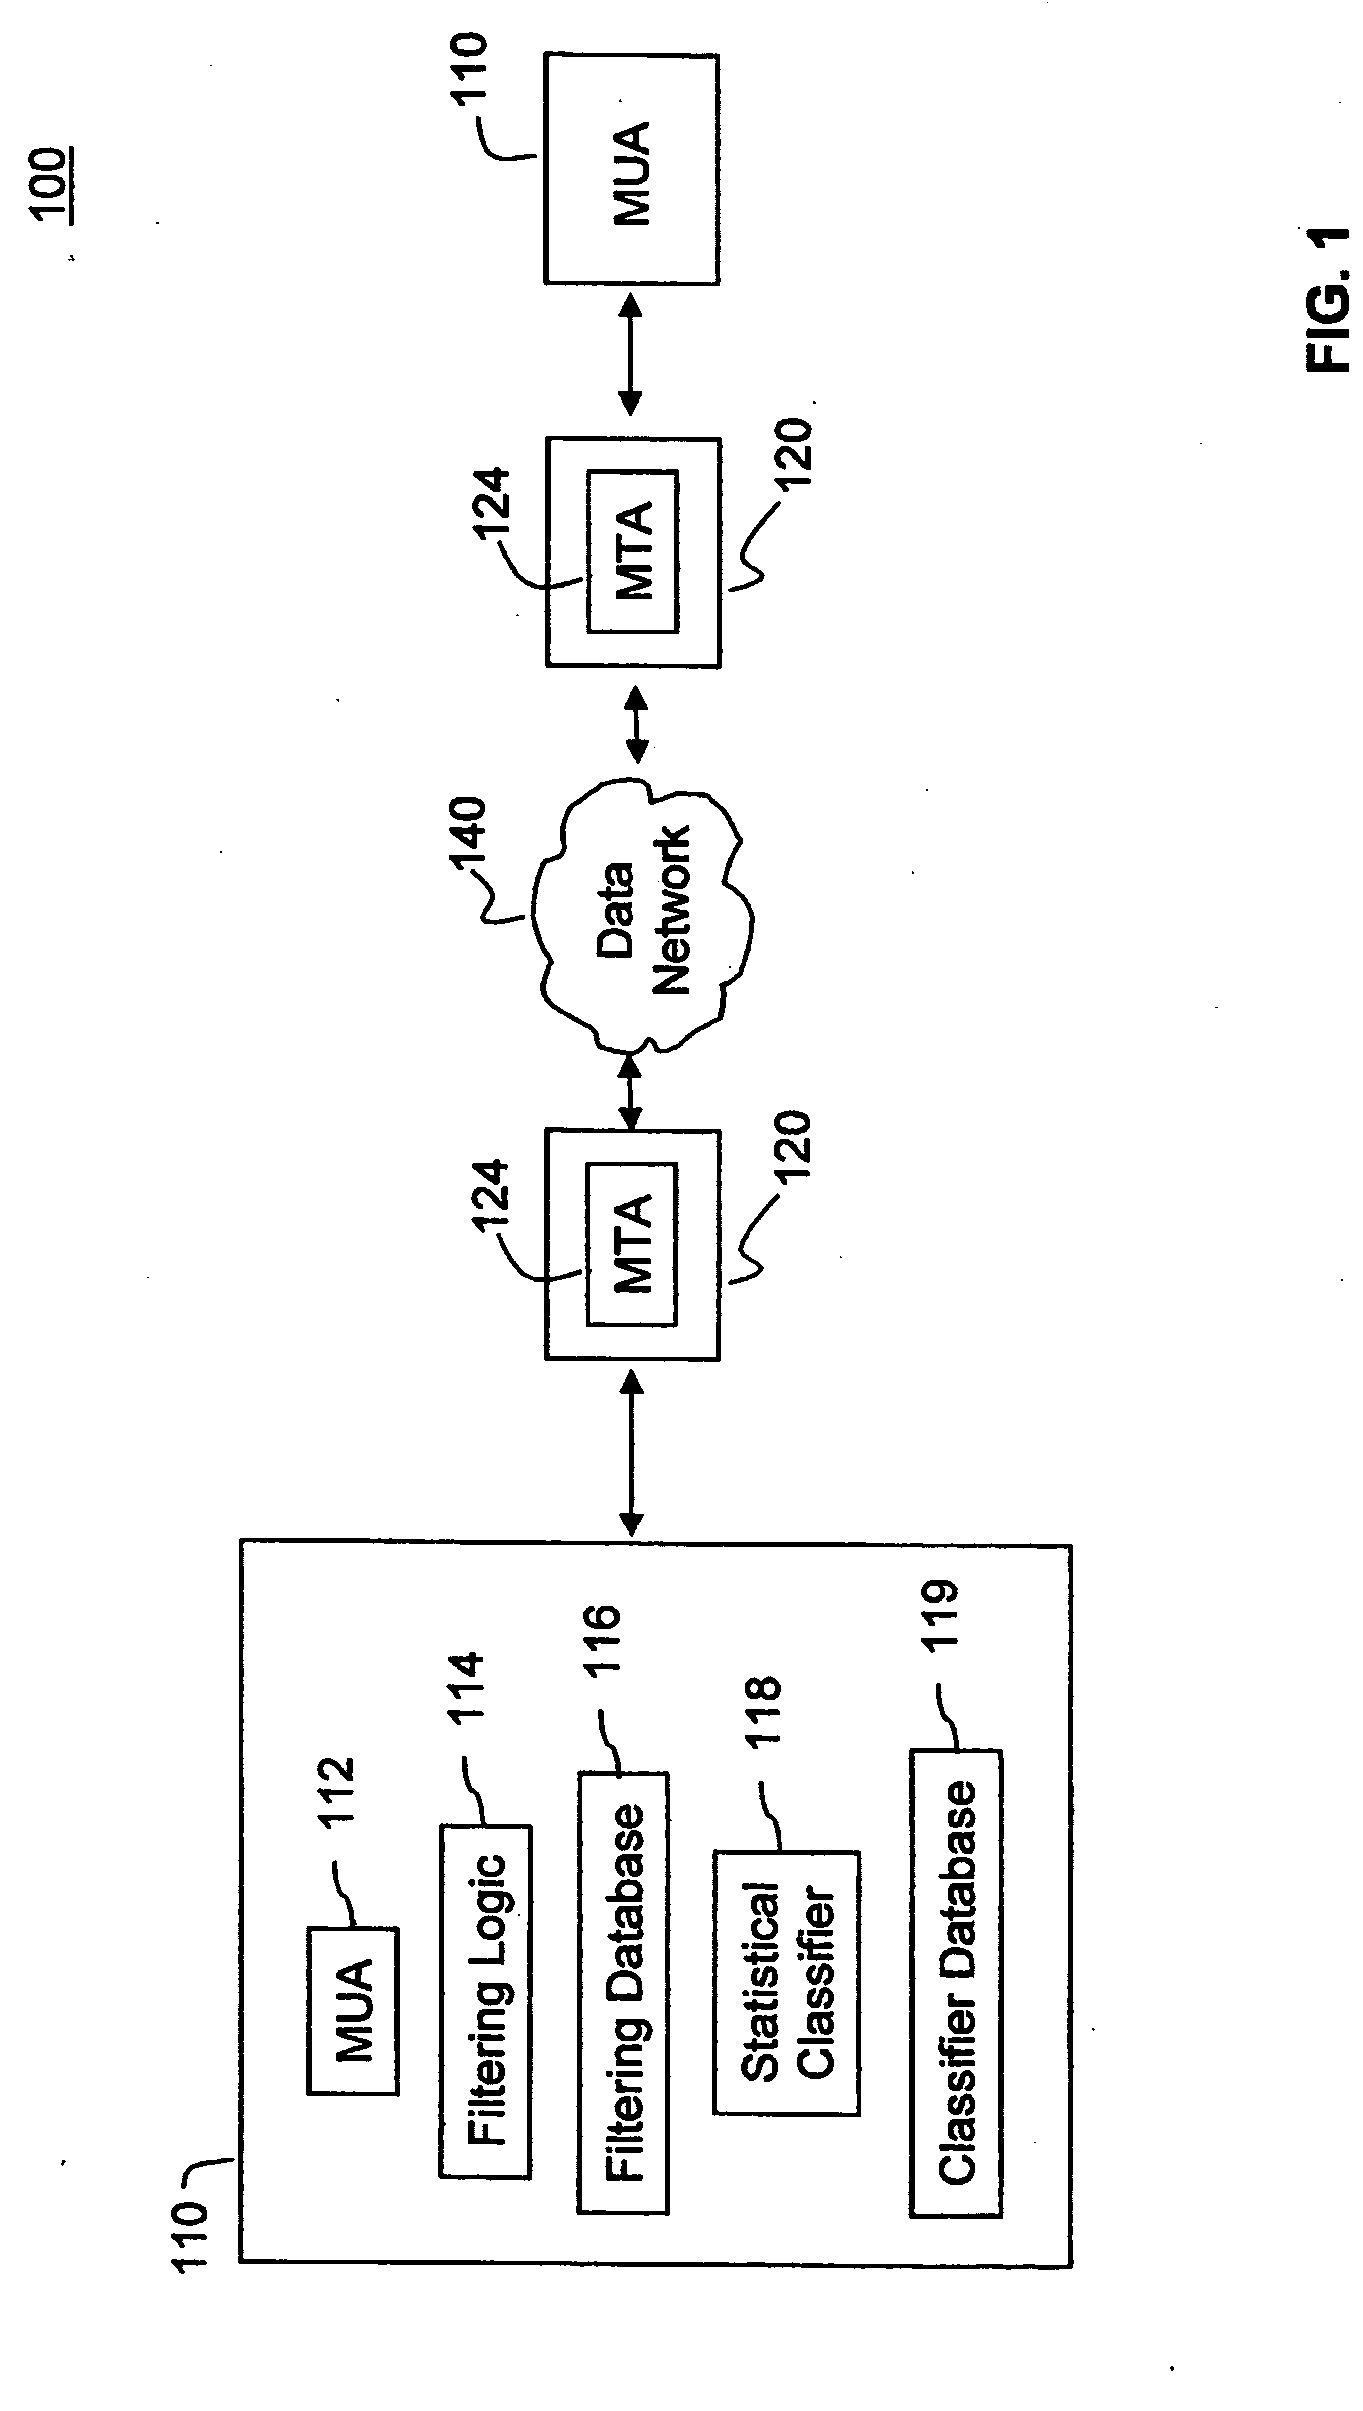 System, method, and computer program product for filtering messages